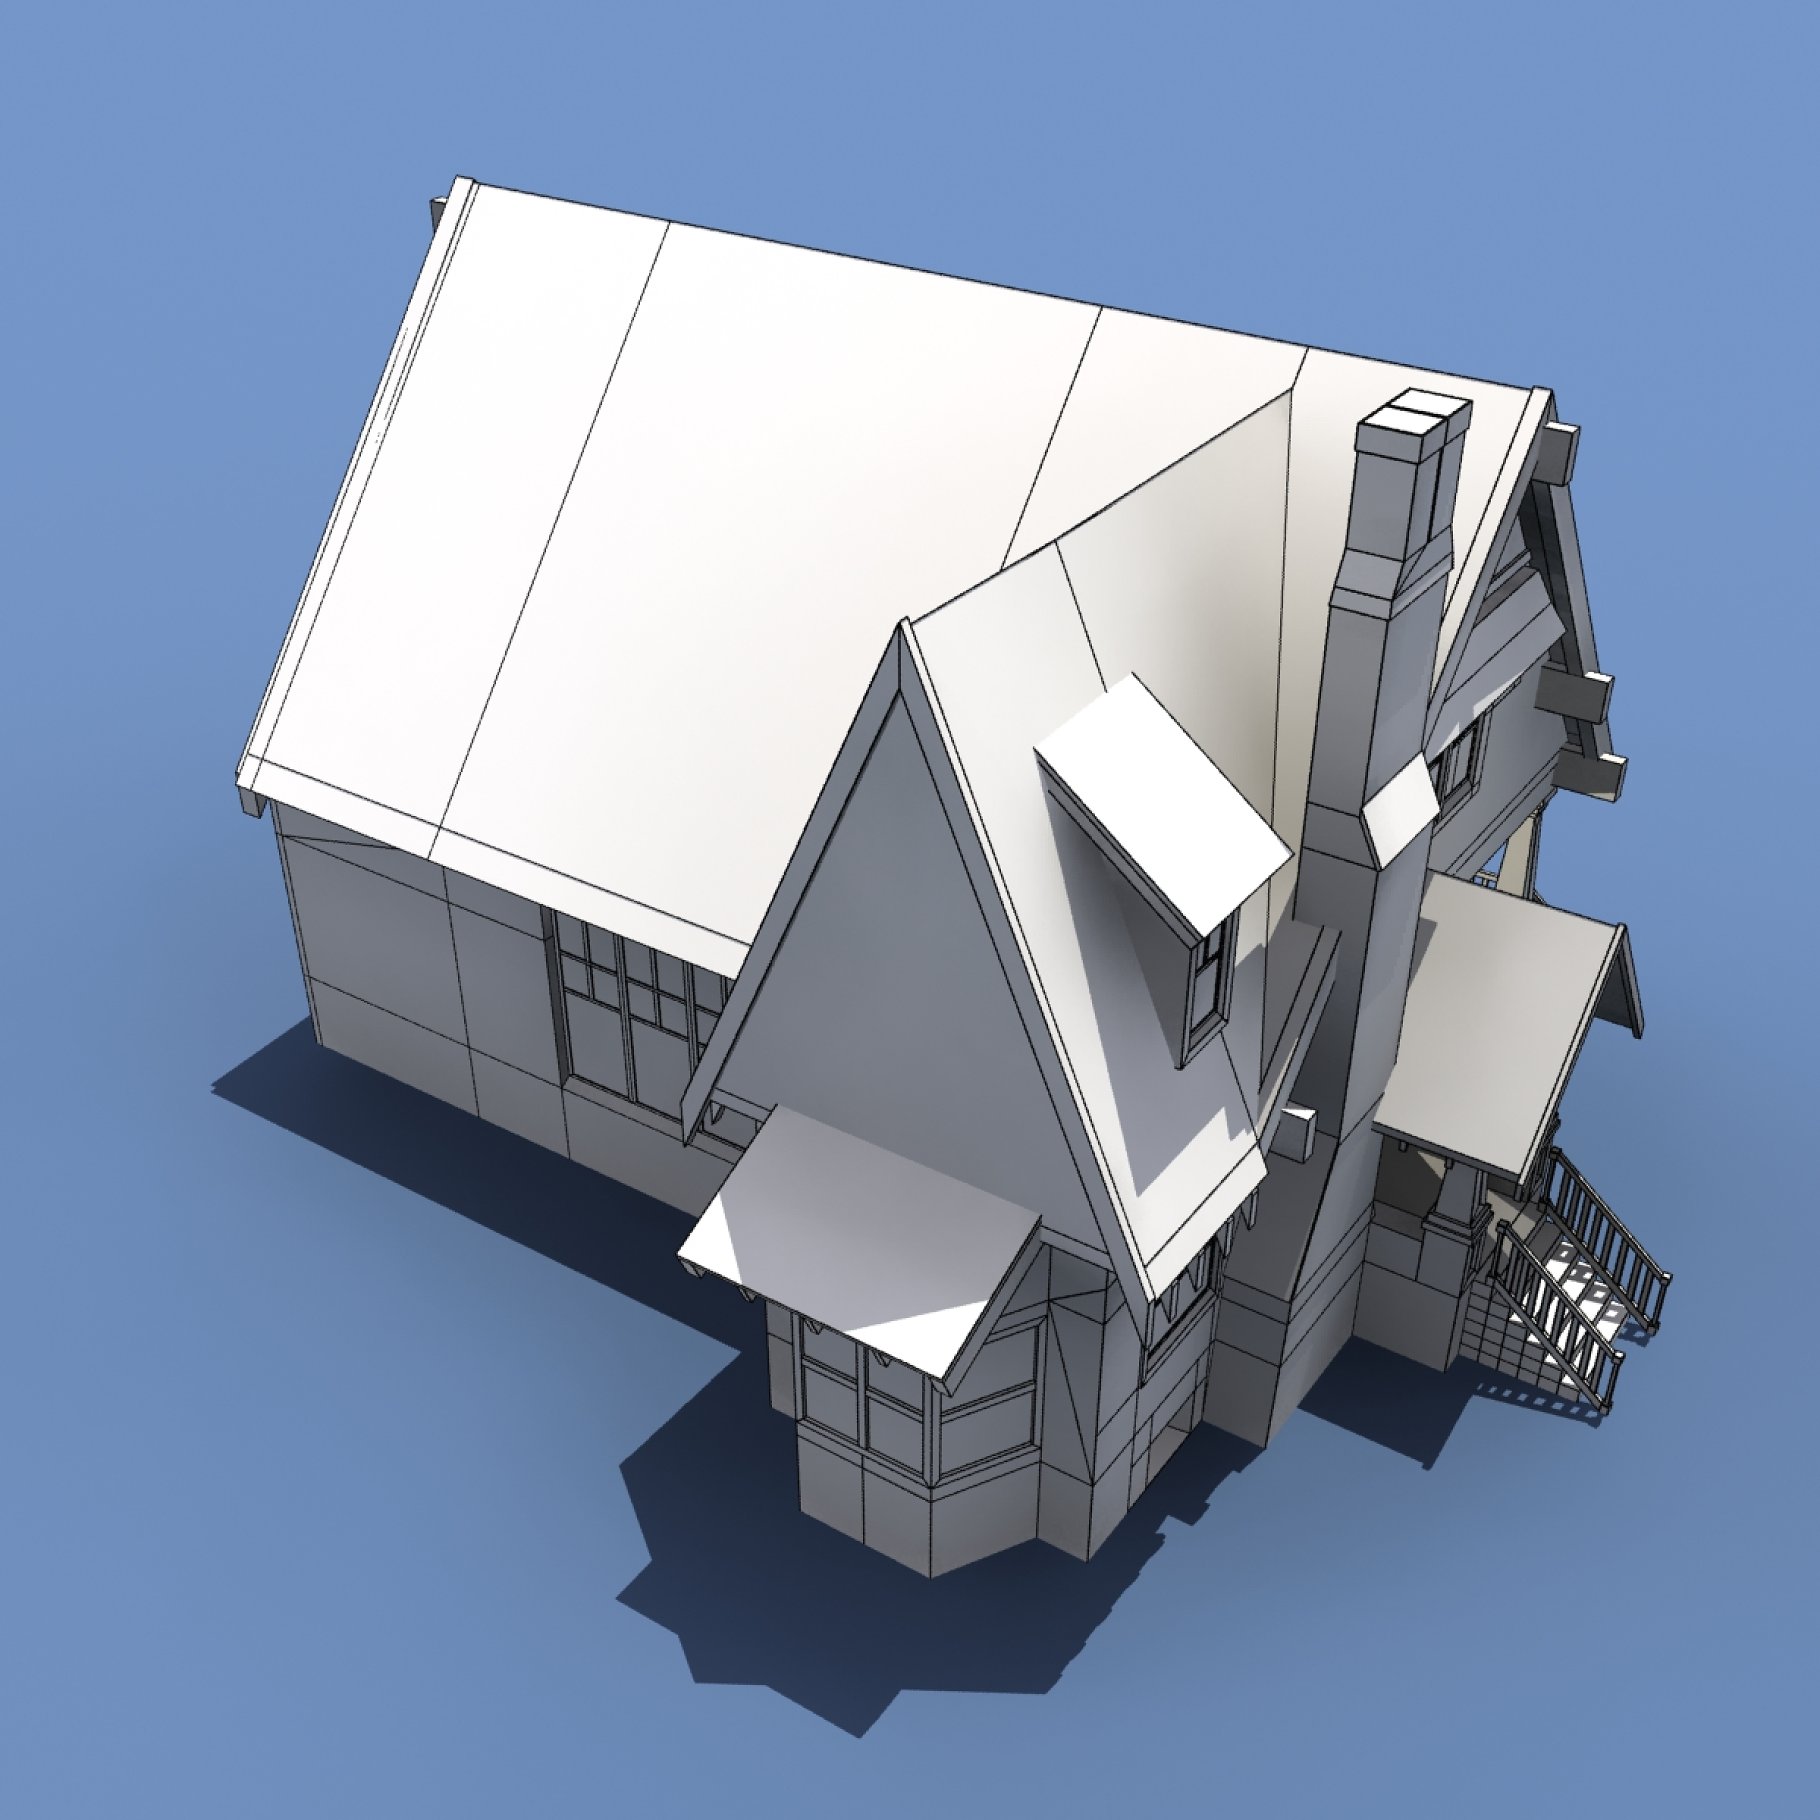 Low poly house graphic mockup on the right side.